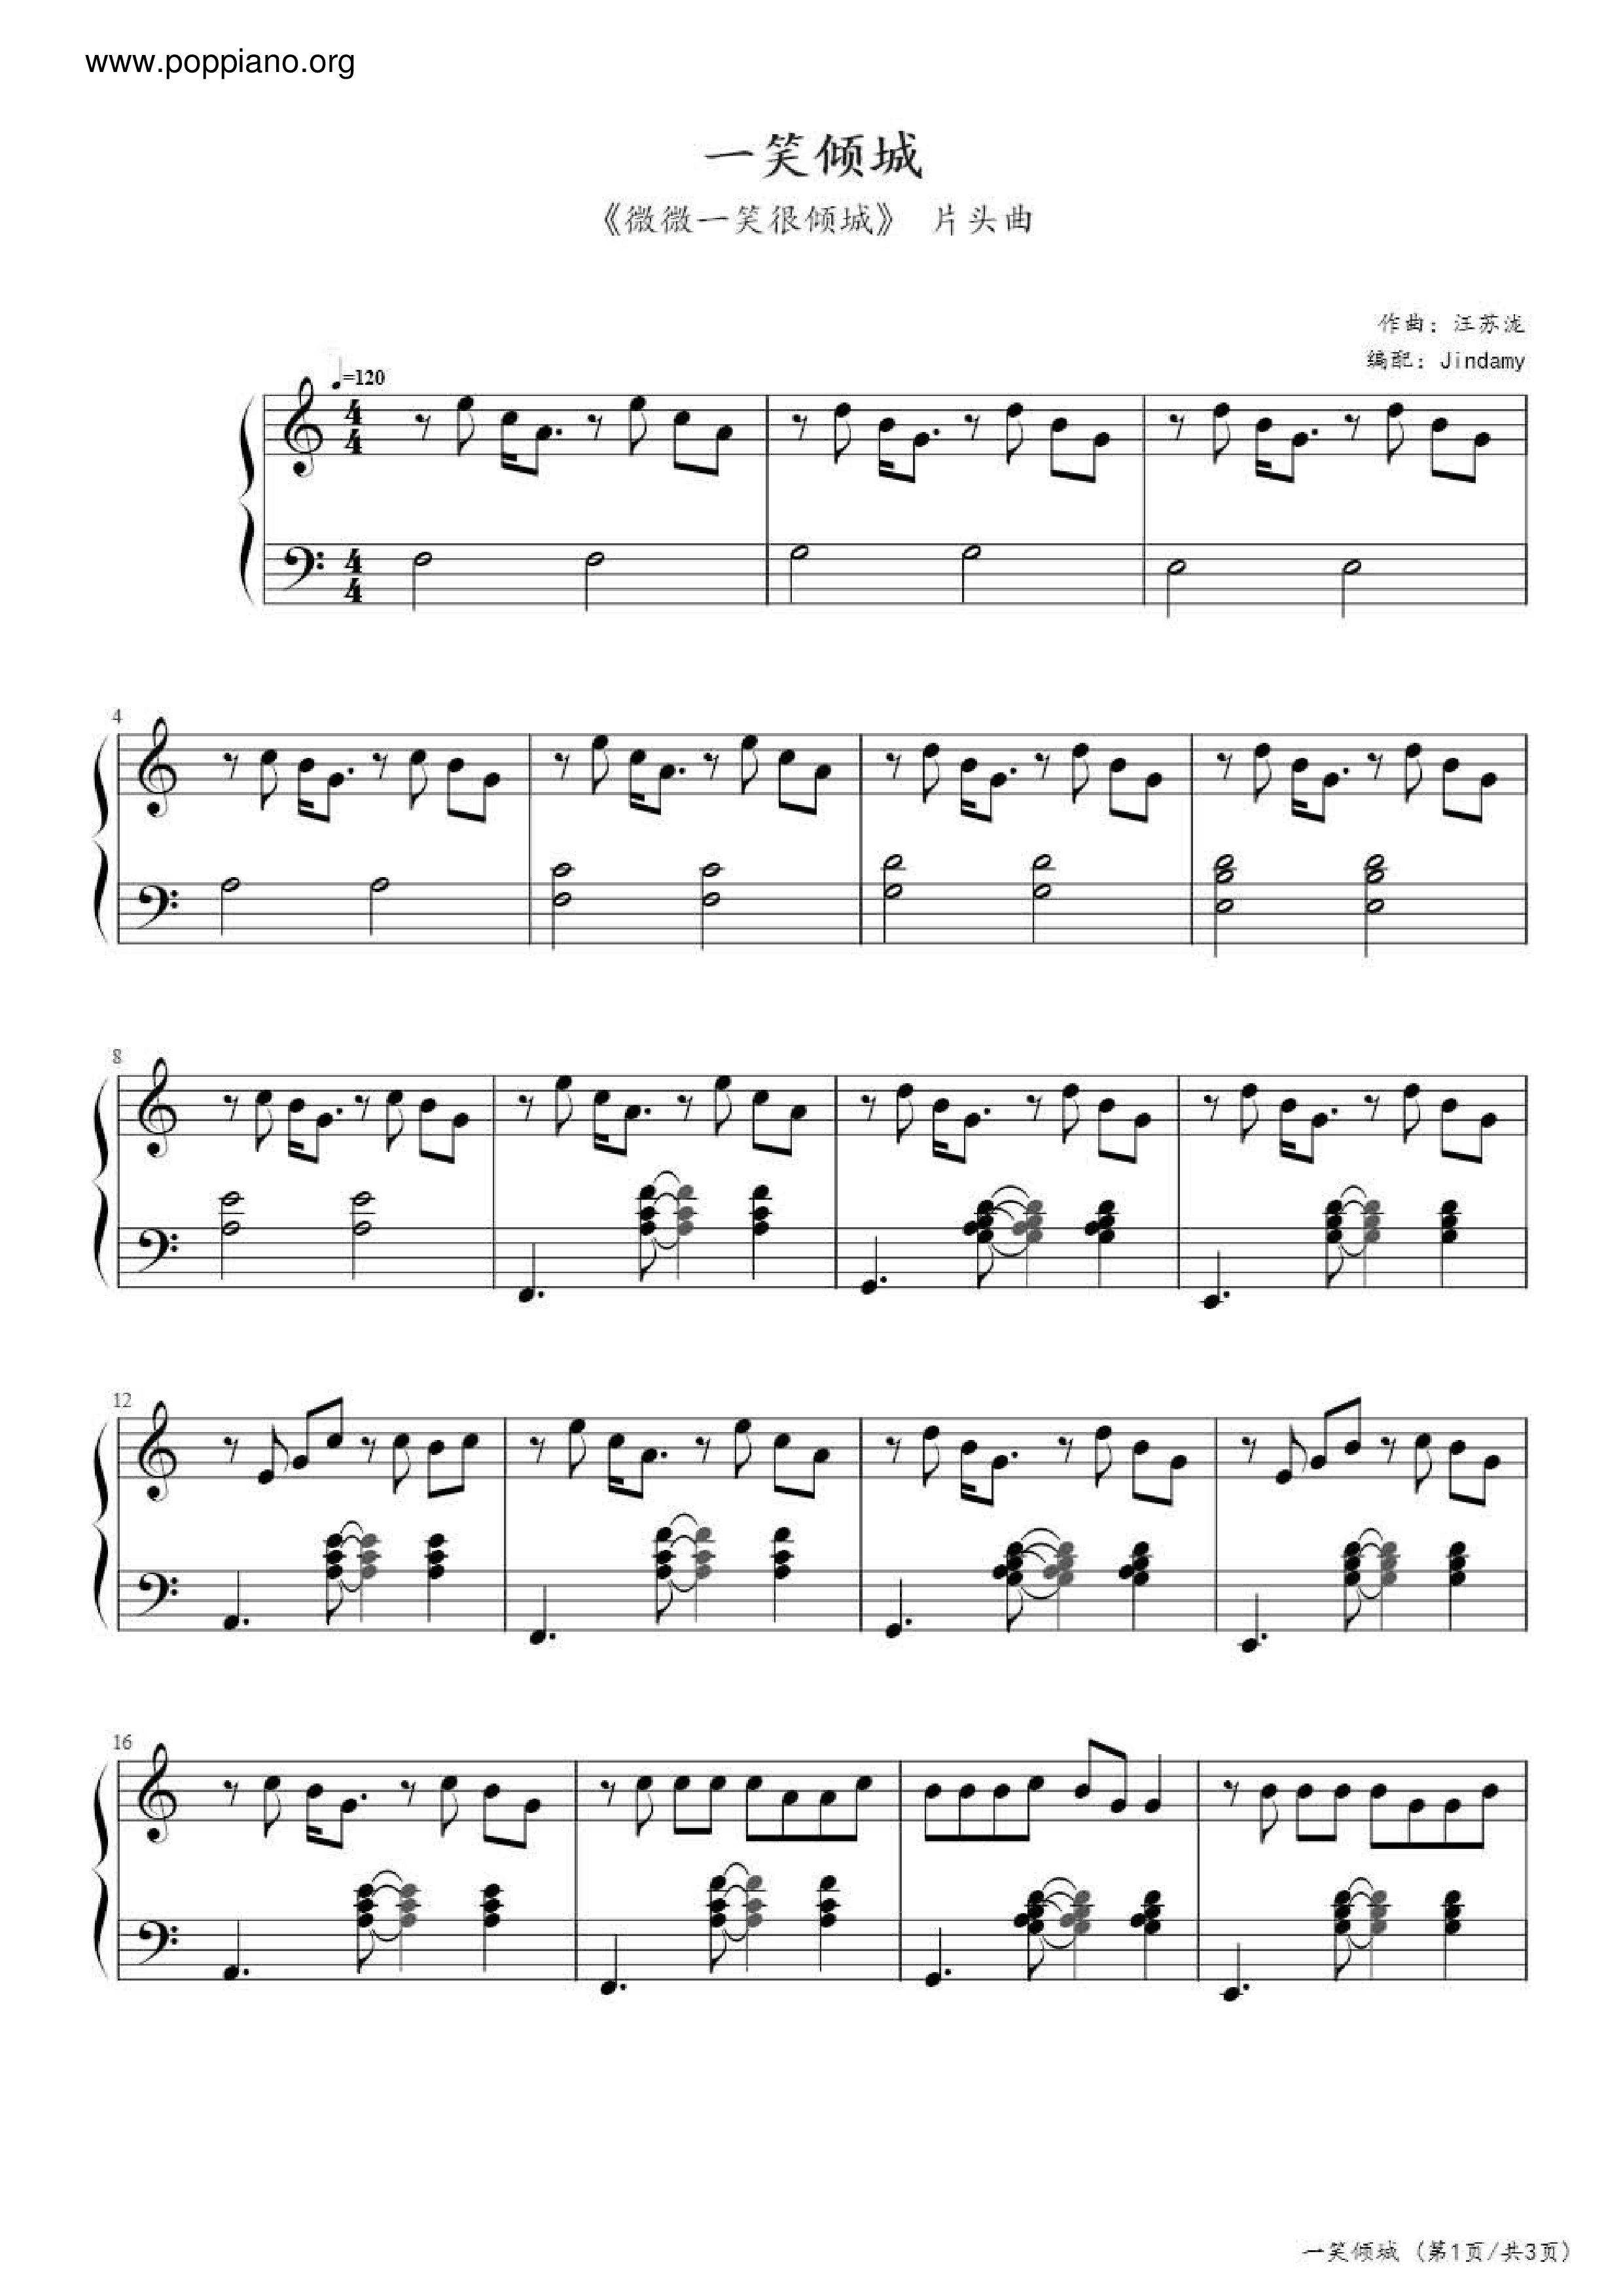 The Opening Song Of "A Smile With A Smile" Score